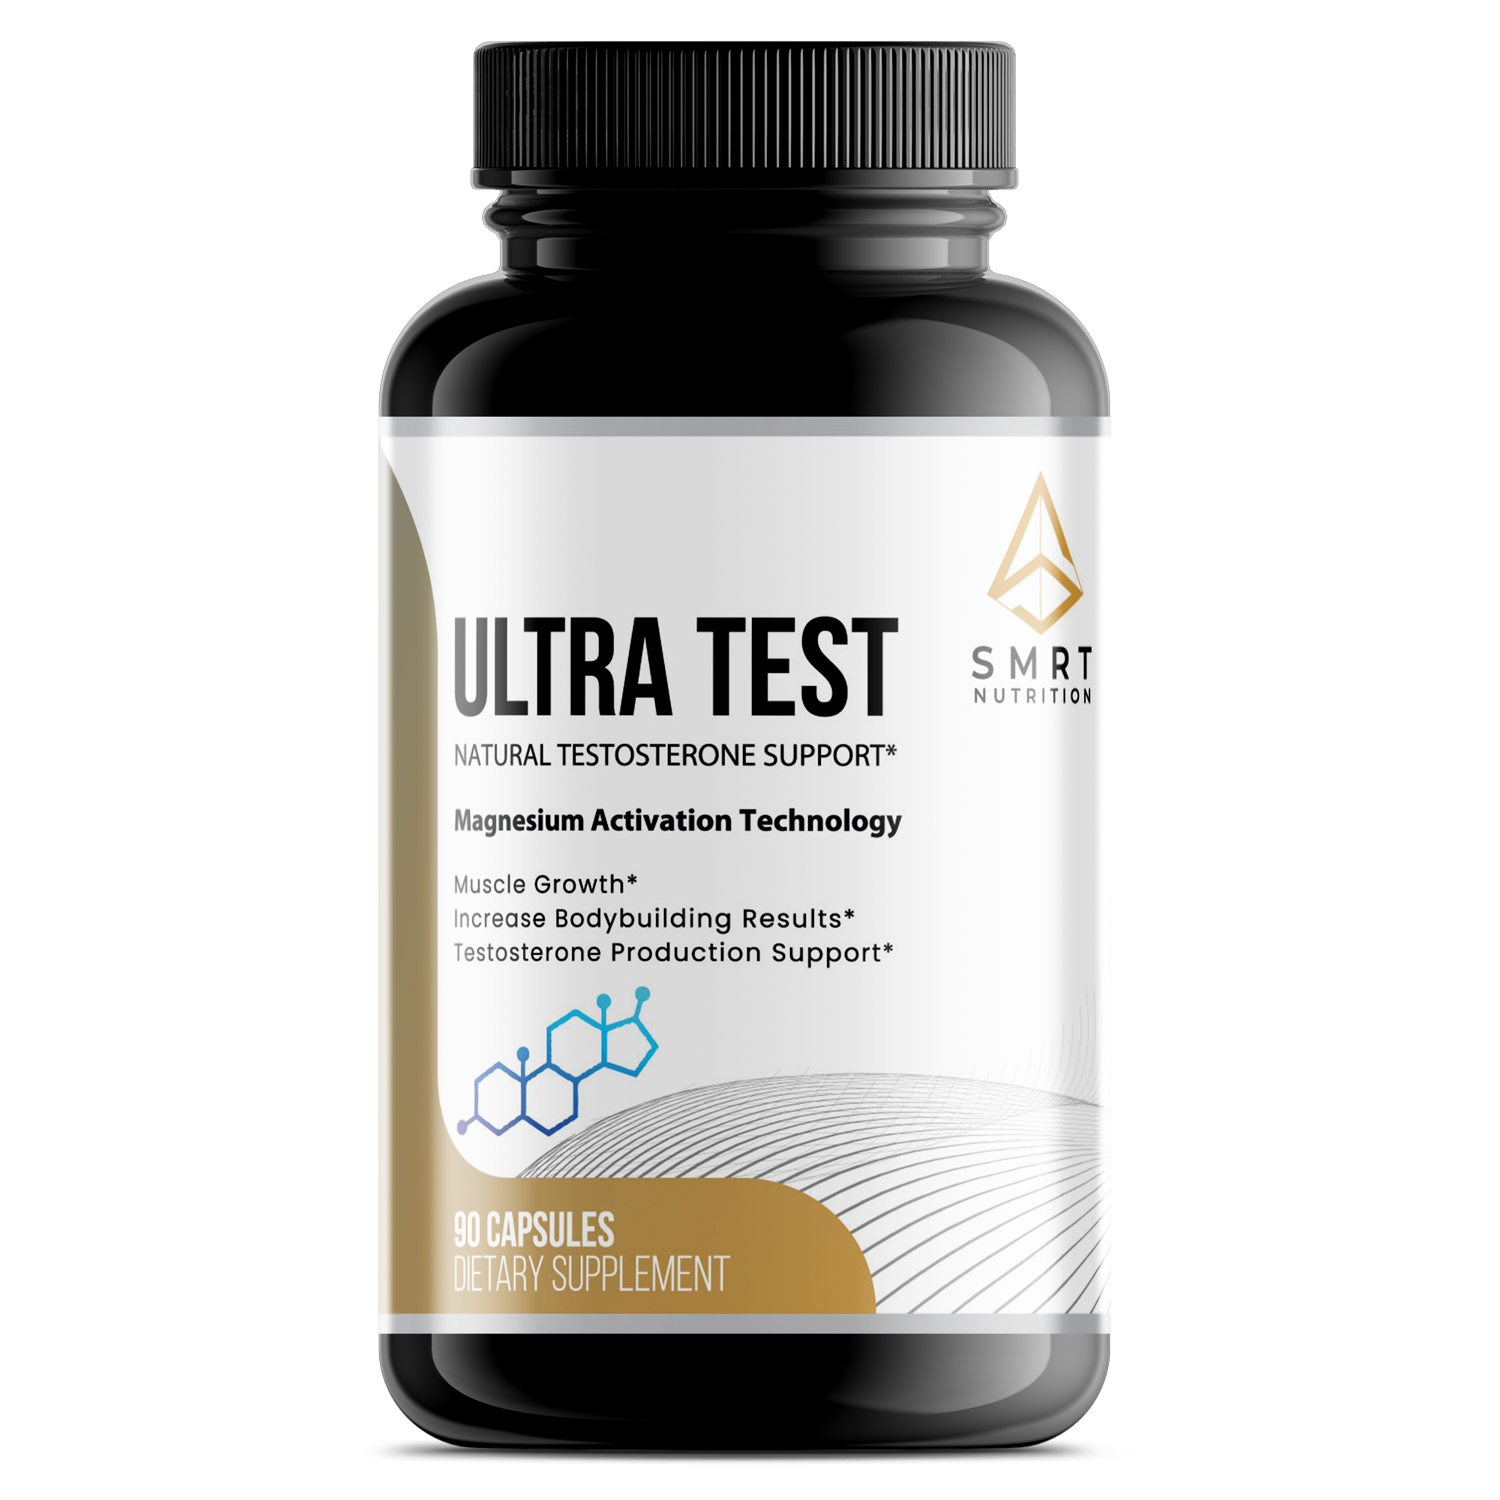 ULTRA TEST NATURAL TESTOSTERONE SUPPORT